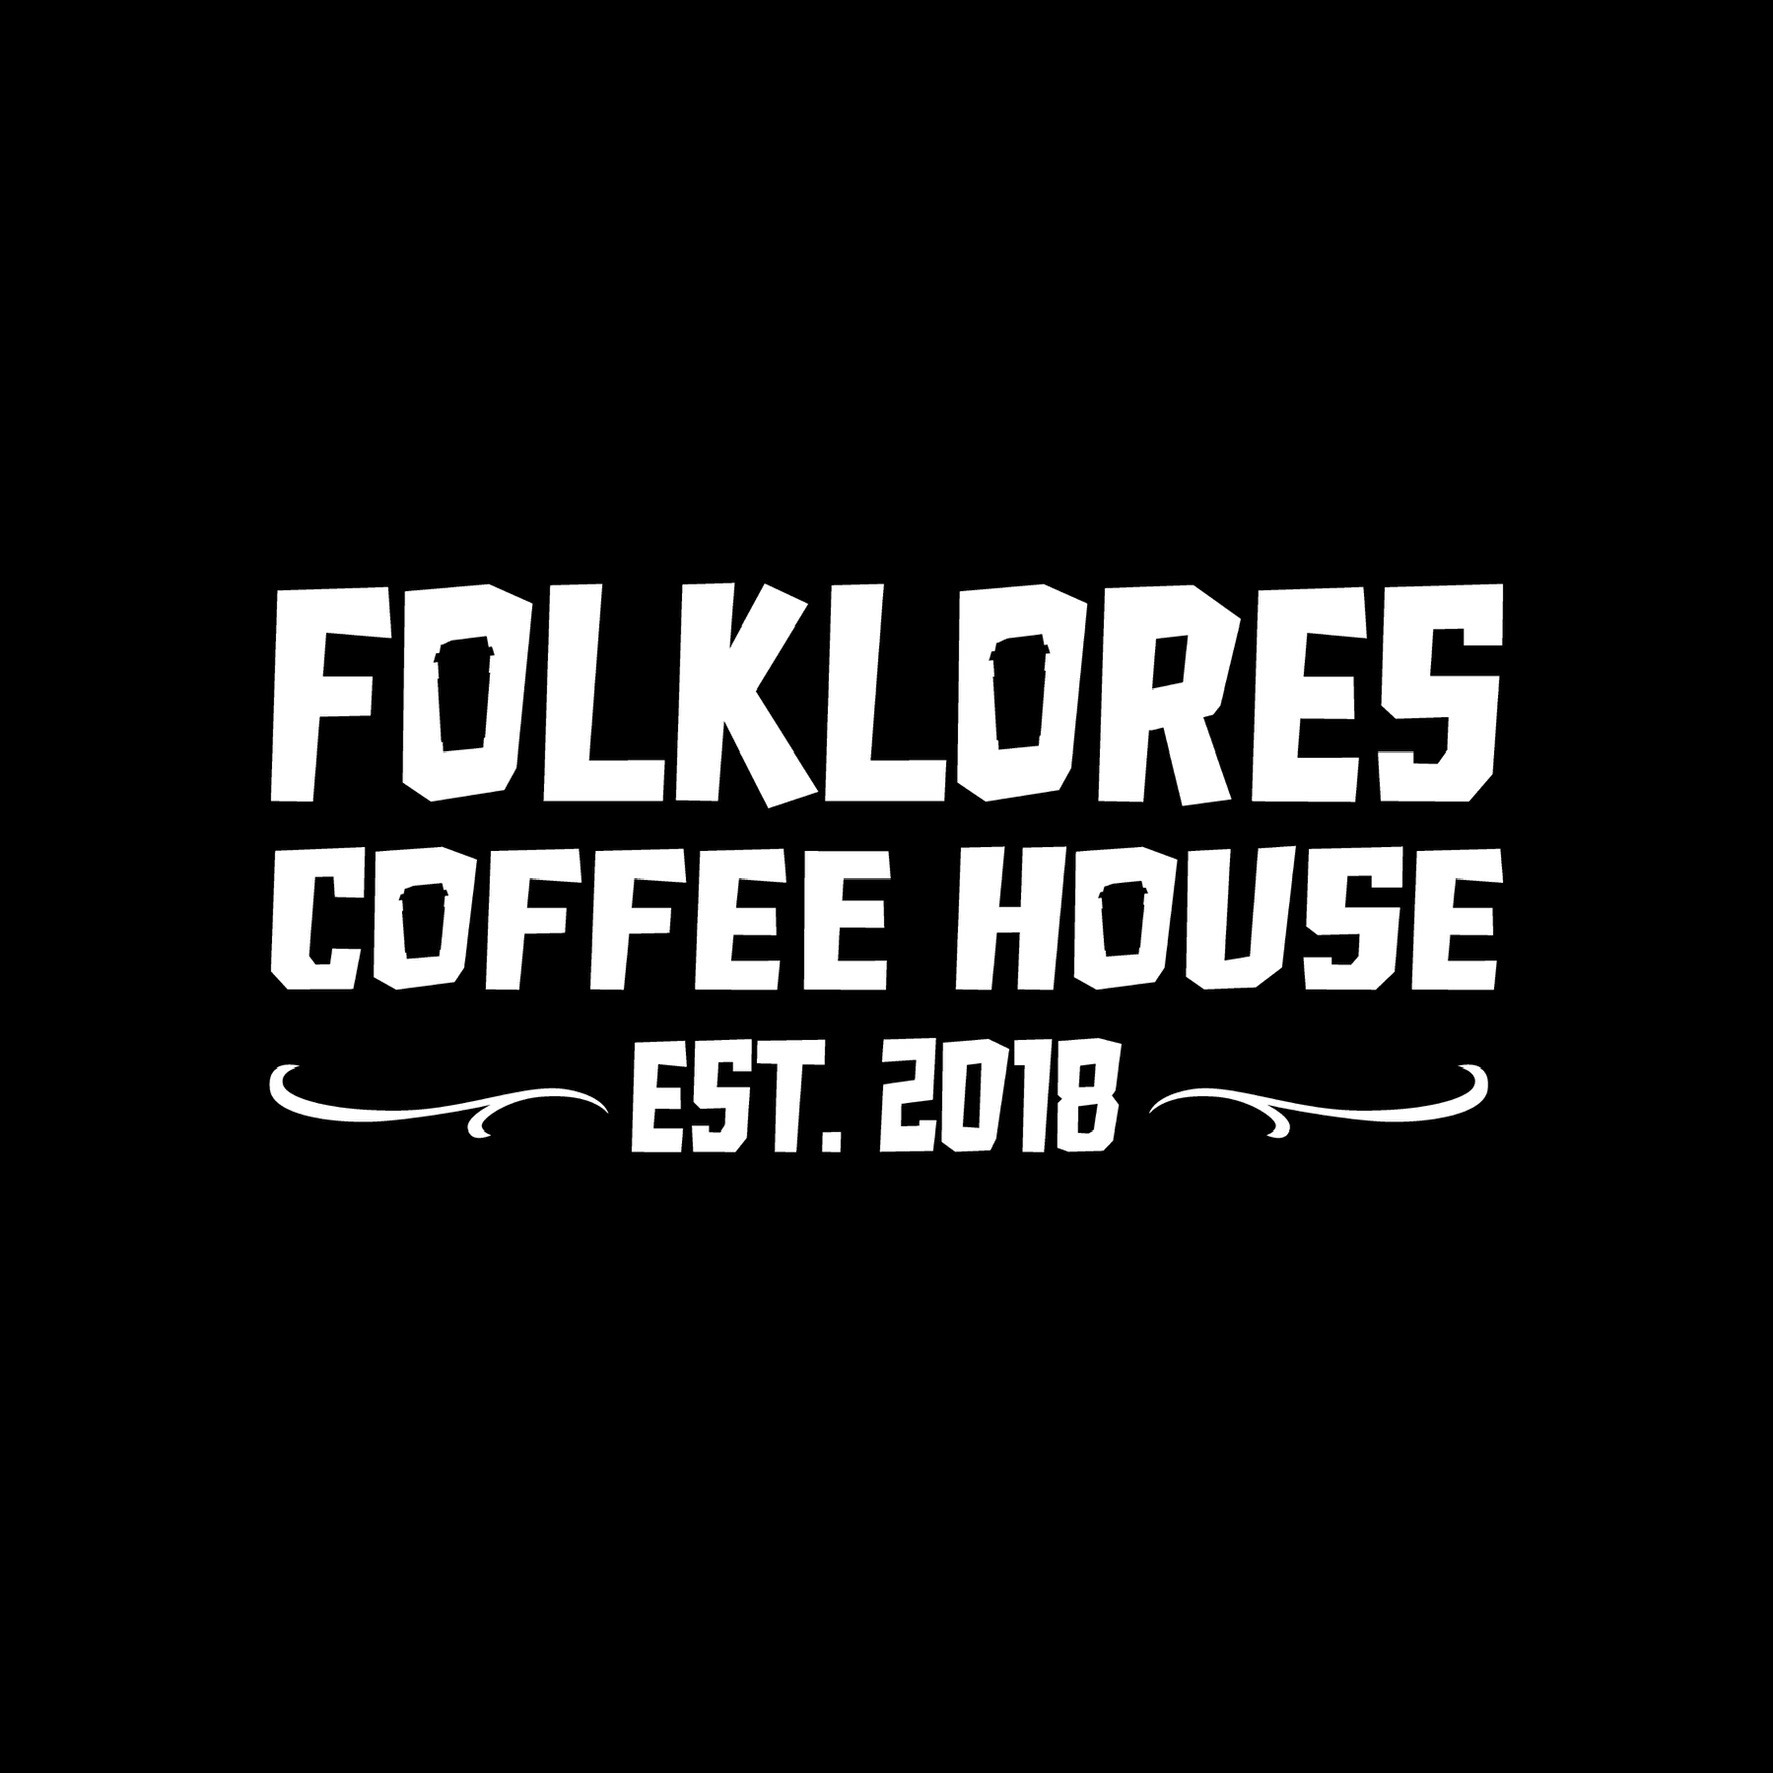 Folklores Coffee House Est 2018